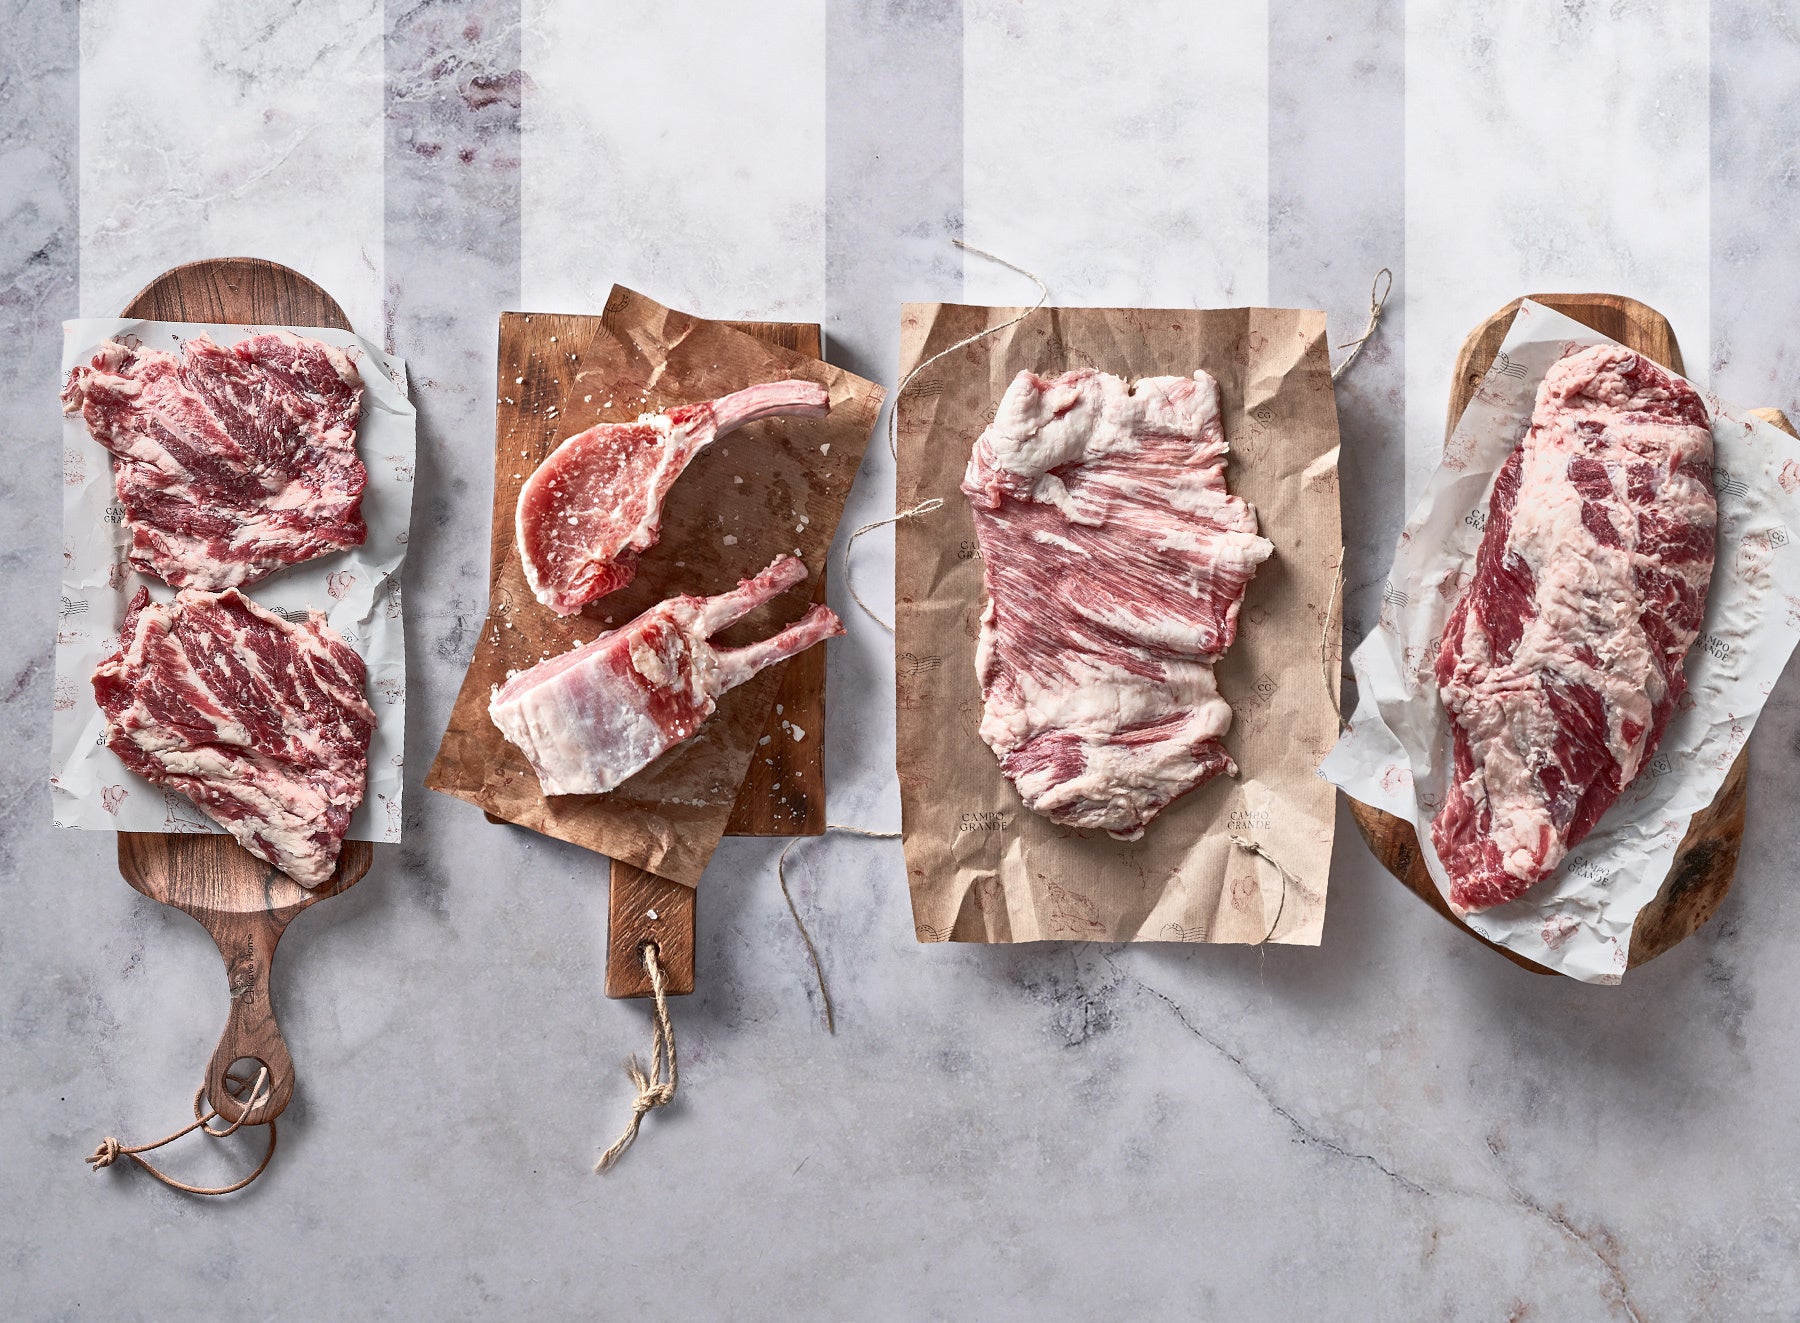 Beginner's Guide to Ibérico Cooking